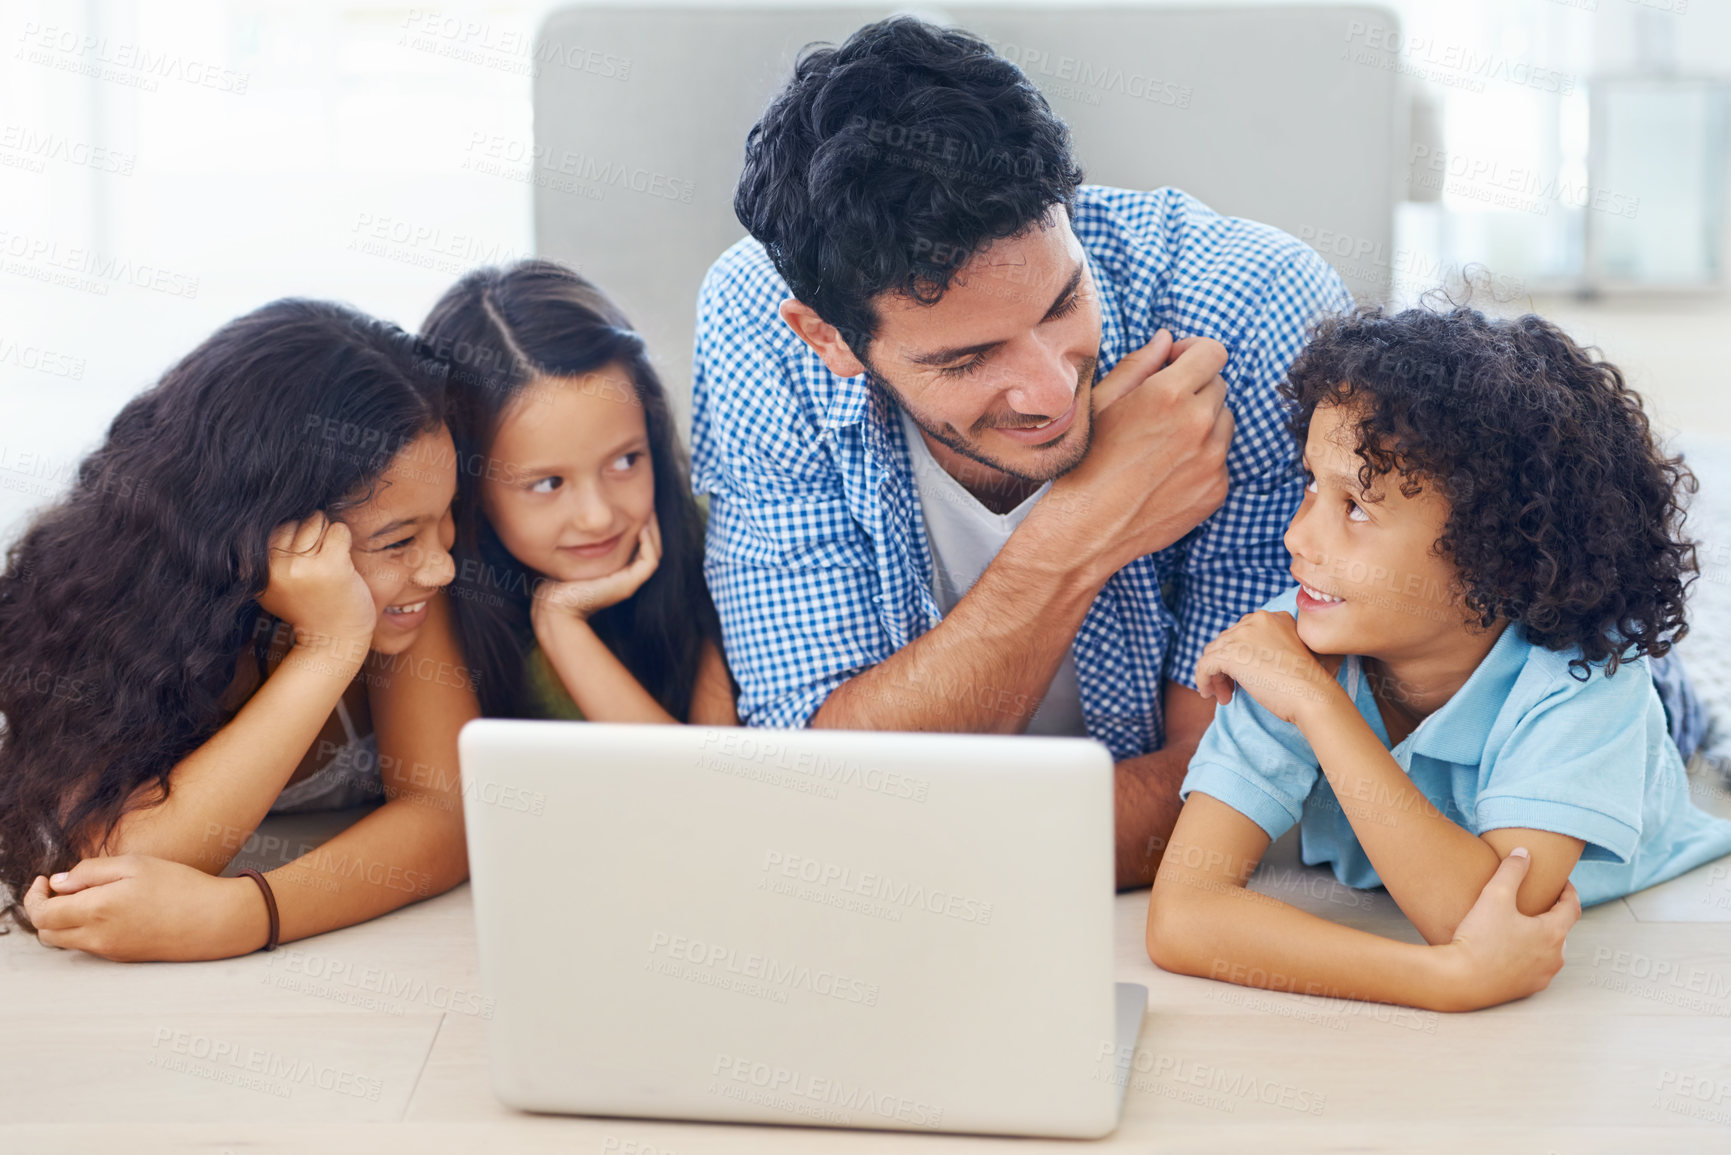 Buy stock photo Shot of a smiling family lying on the floor and surfing the internet